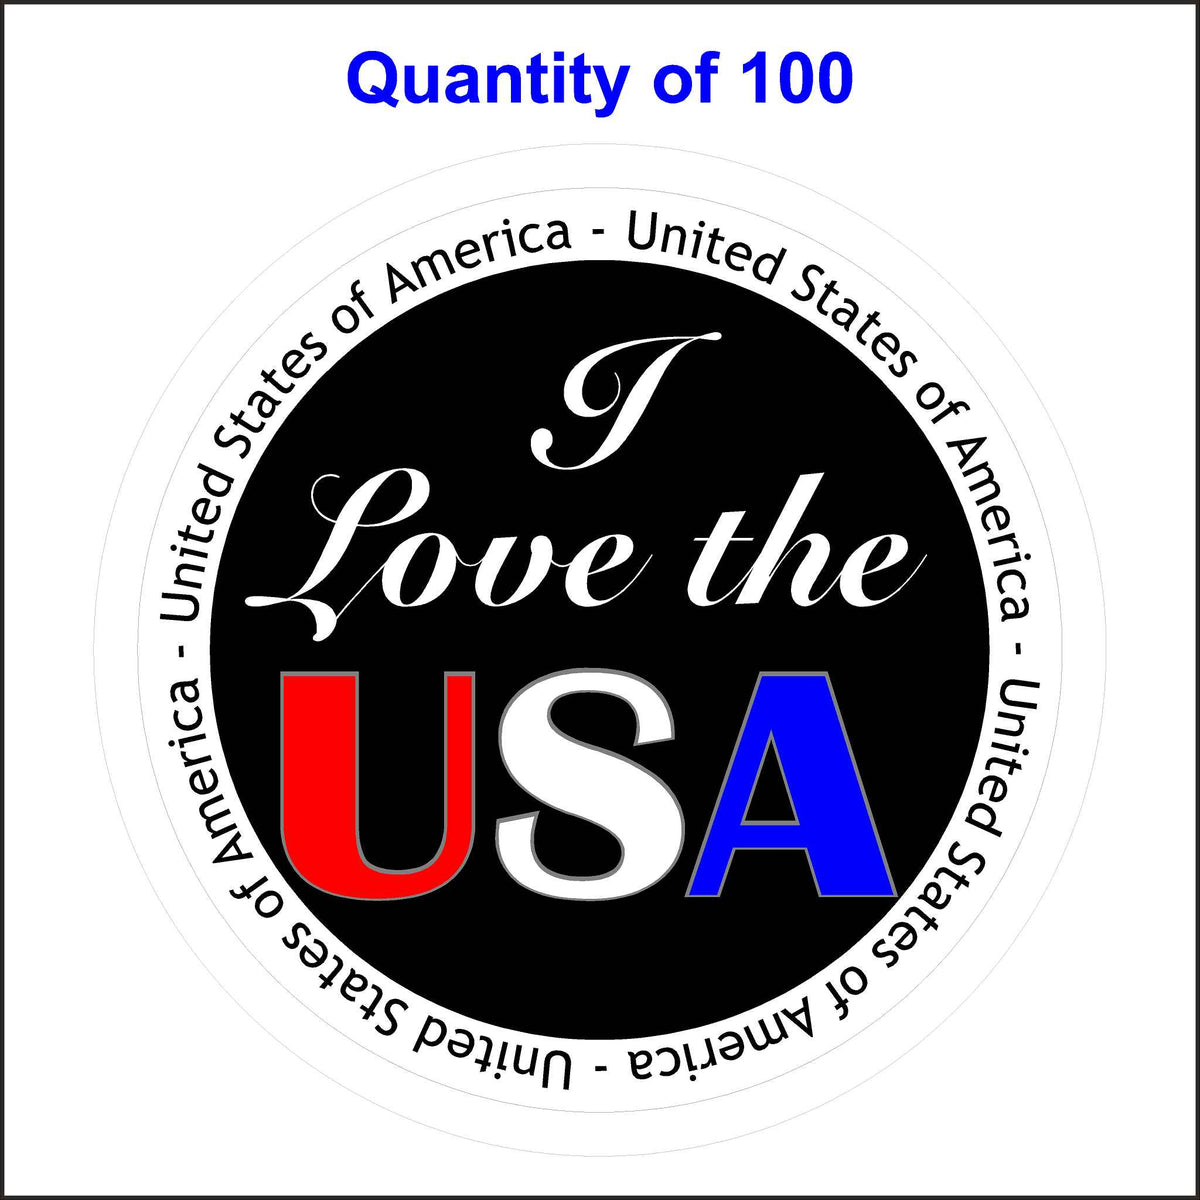 I Love the USA United States of America Sticker. Red, White and Blue Letters on a Black Background. 100 Quantity.